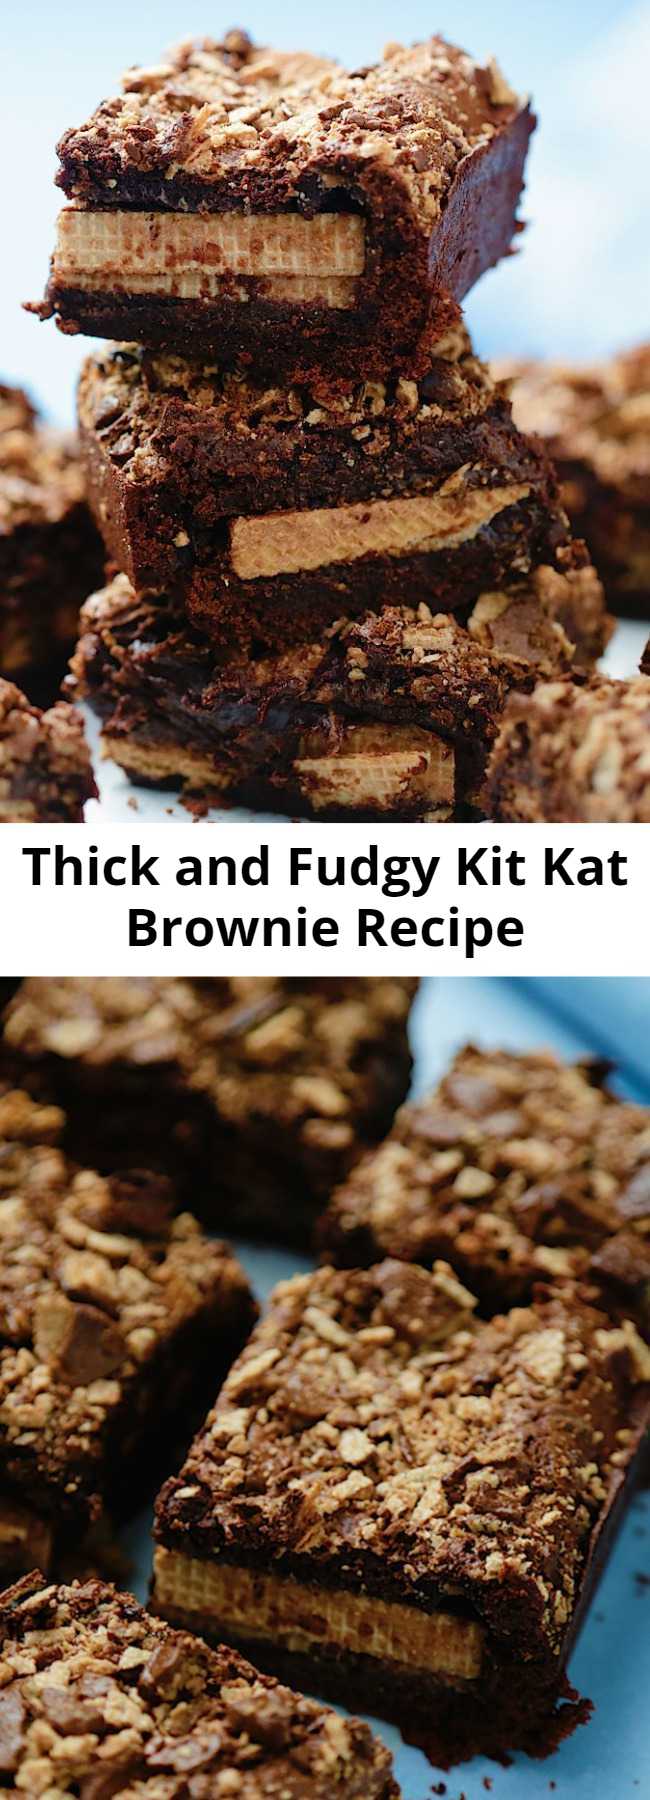 Thick and Fudgy Kit Kat Brownie Recipe - Deliciously thick and fudgy chocolate brownies that are stuffed with whole KitKats, and generously topped with broken KitKats! We added some Kit Kats and took brownies to a whole new level. #kitkat #kitkatcake #brownie #brownierecipe #baking #cooking #chocolate #chocolatedessert